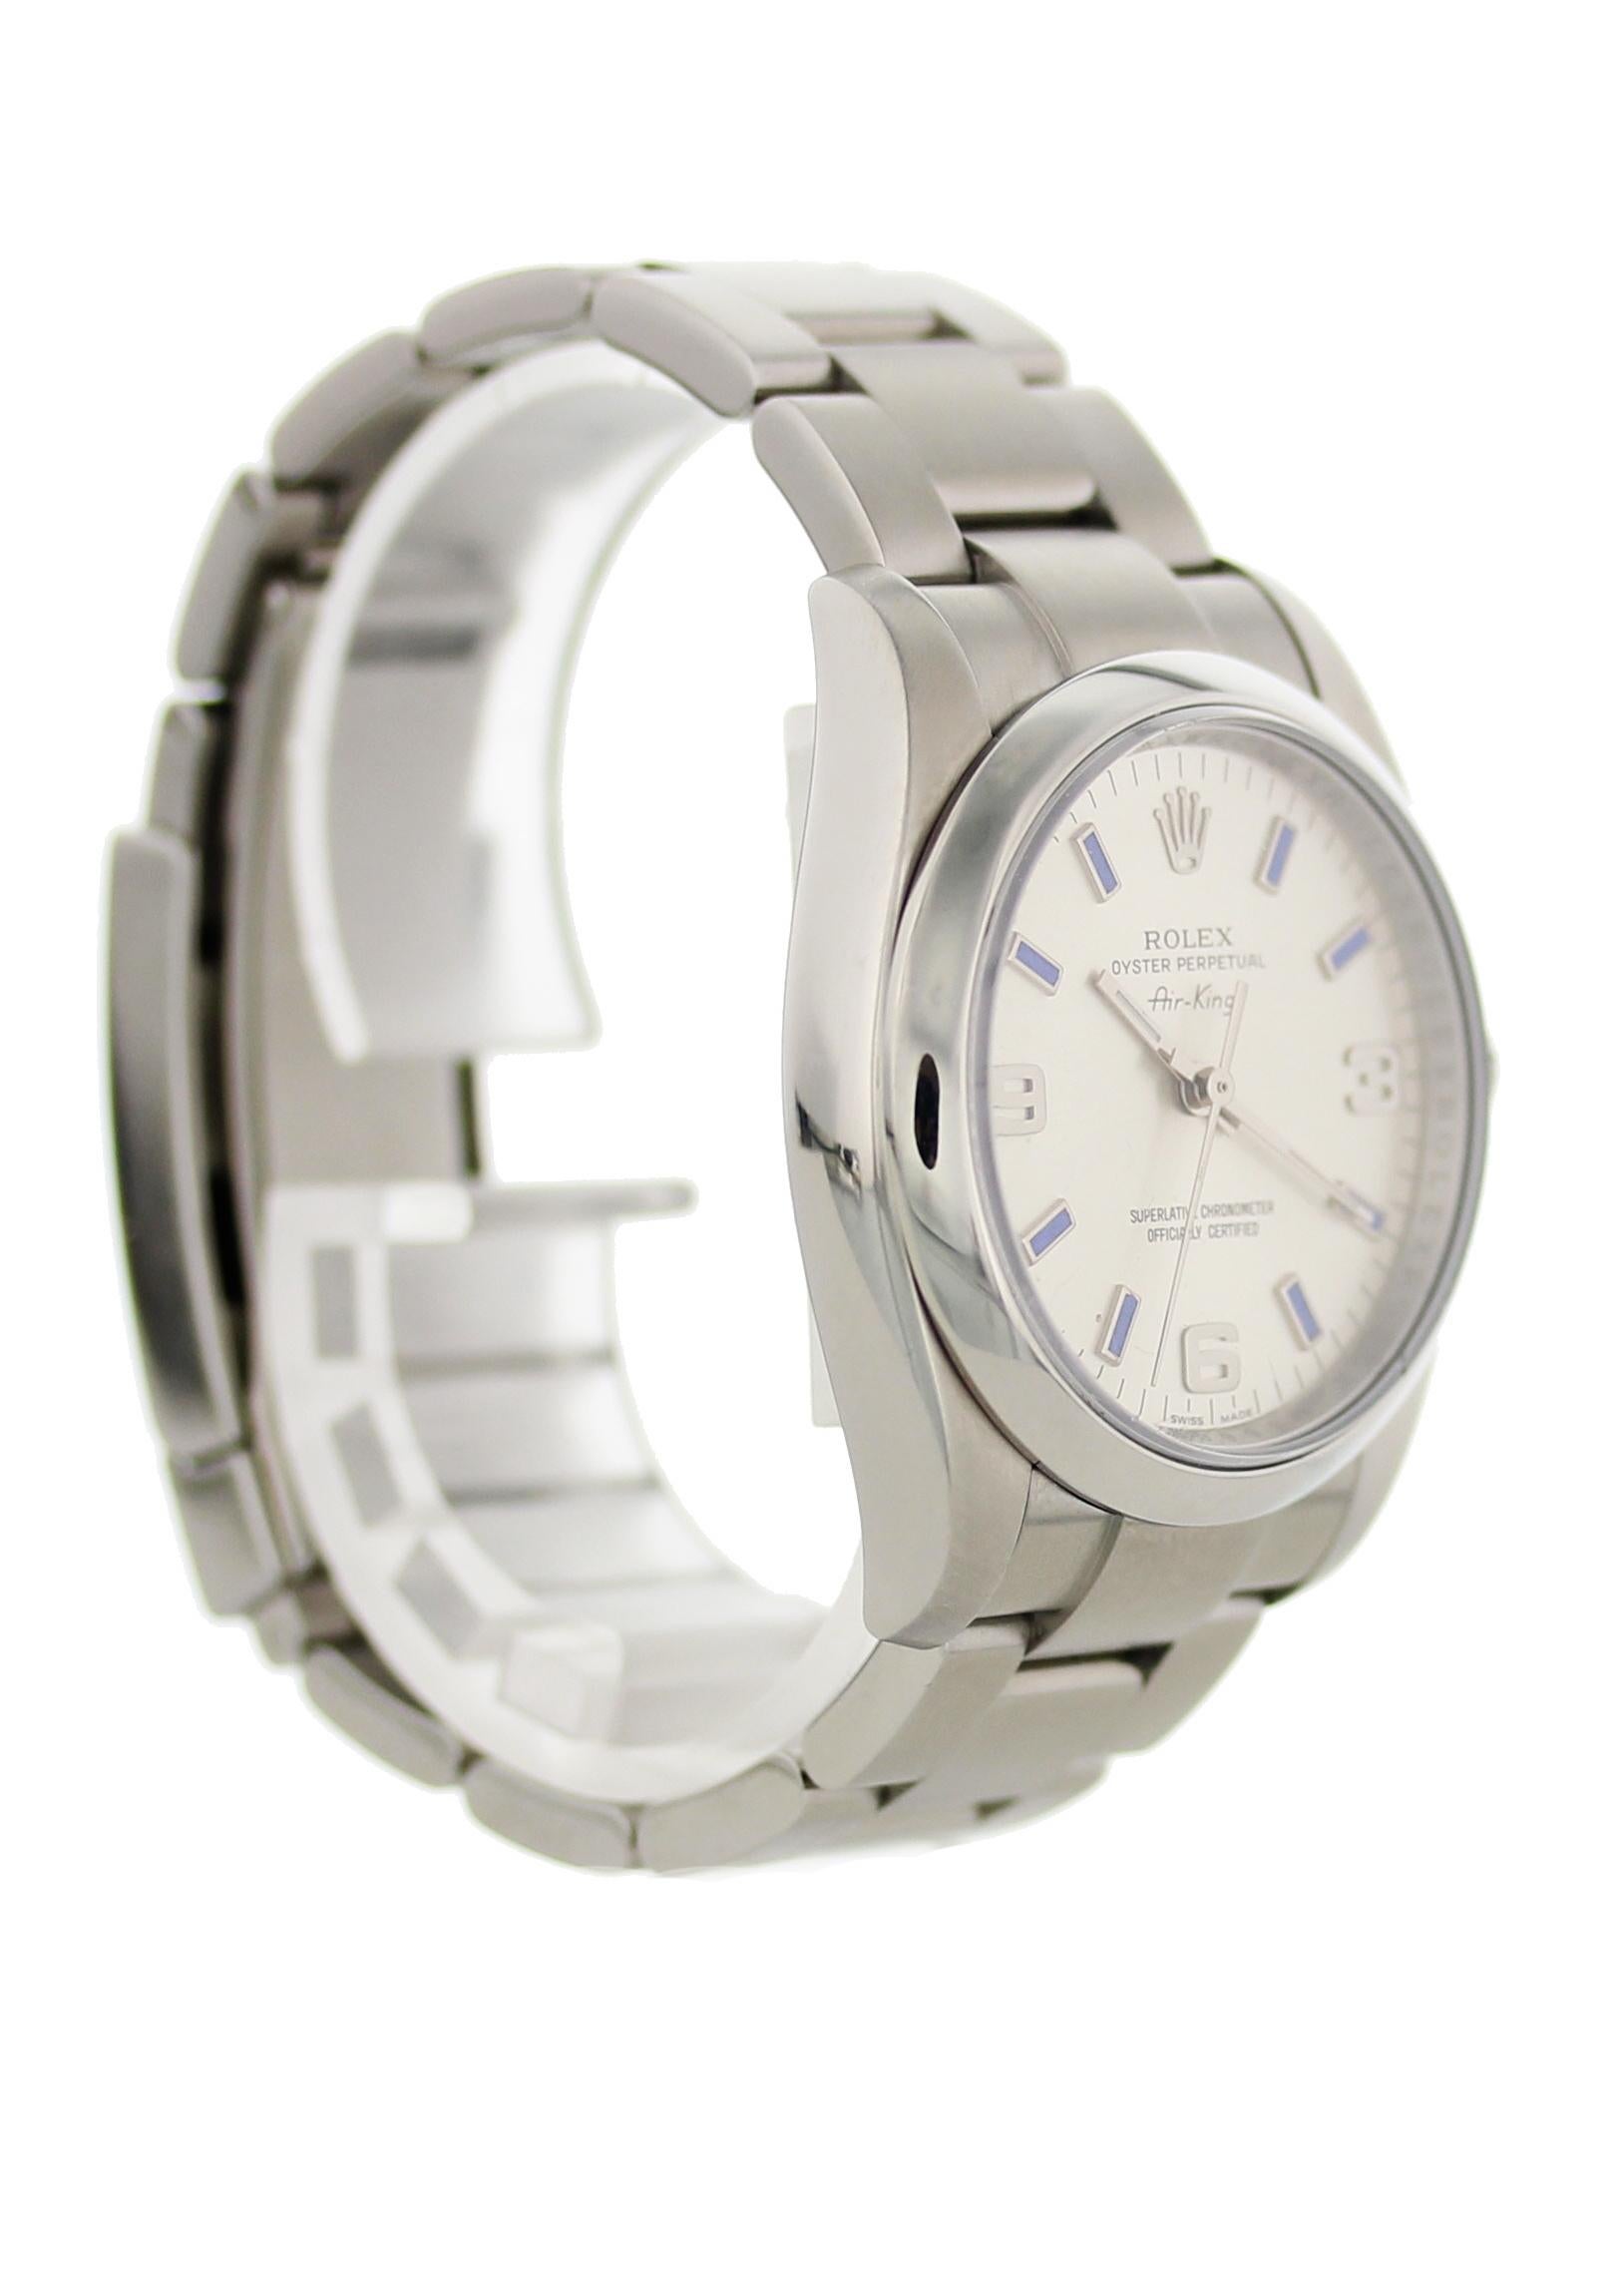 Men's Rolex Oyster Perpetual Air-King 114200 For Sale